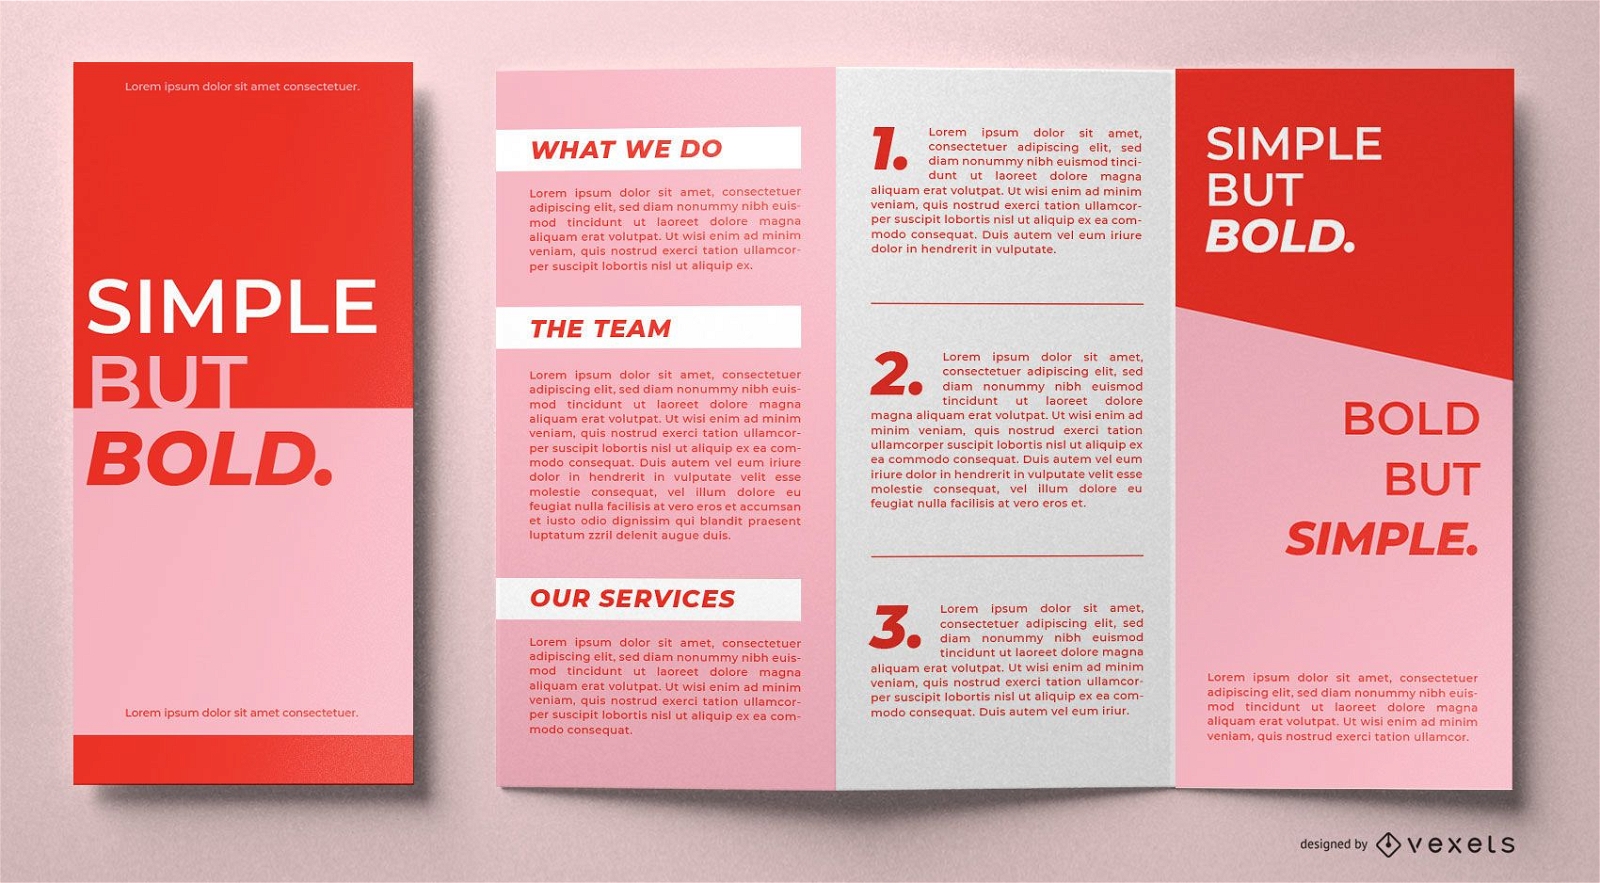 Simple but bold brochure template